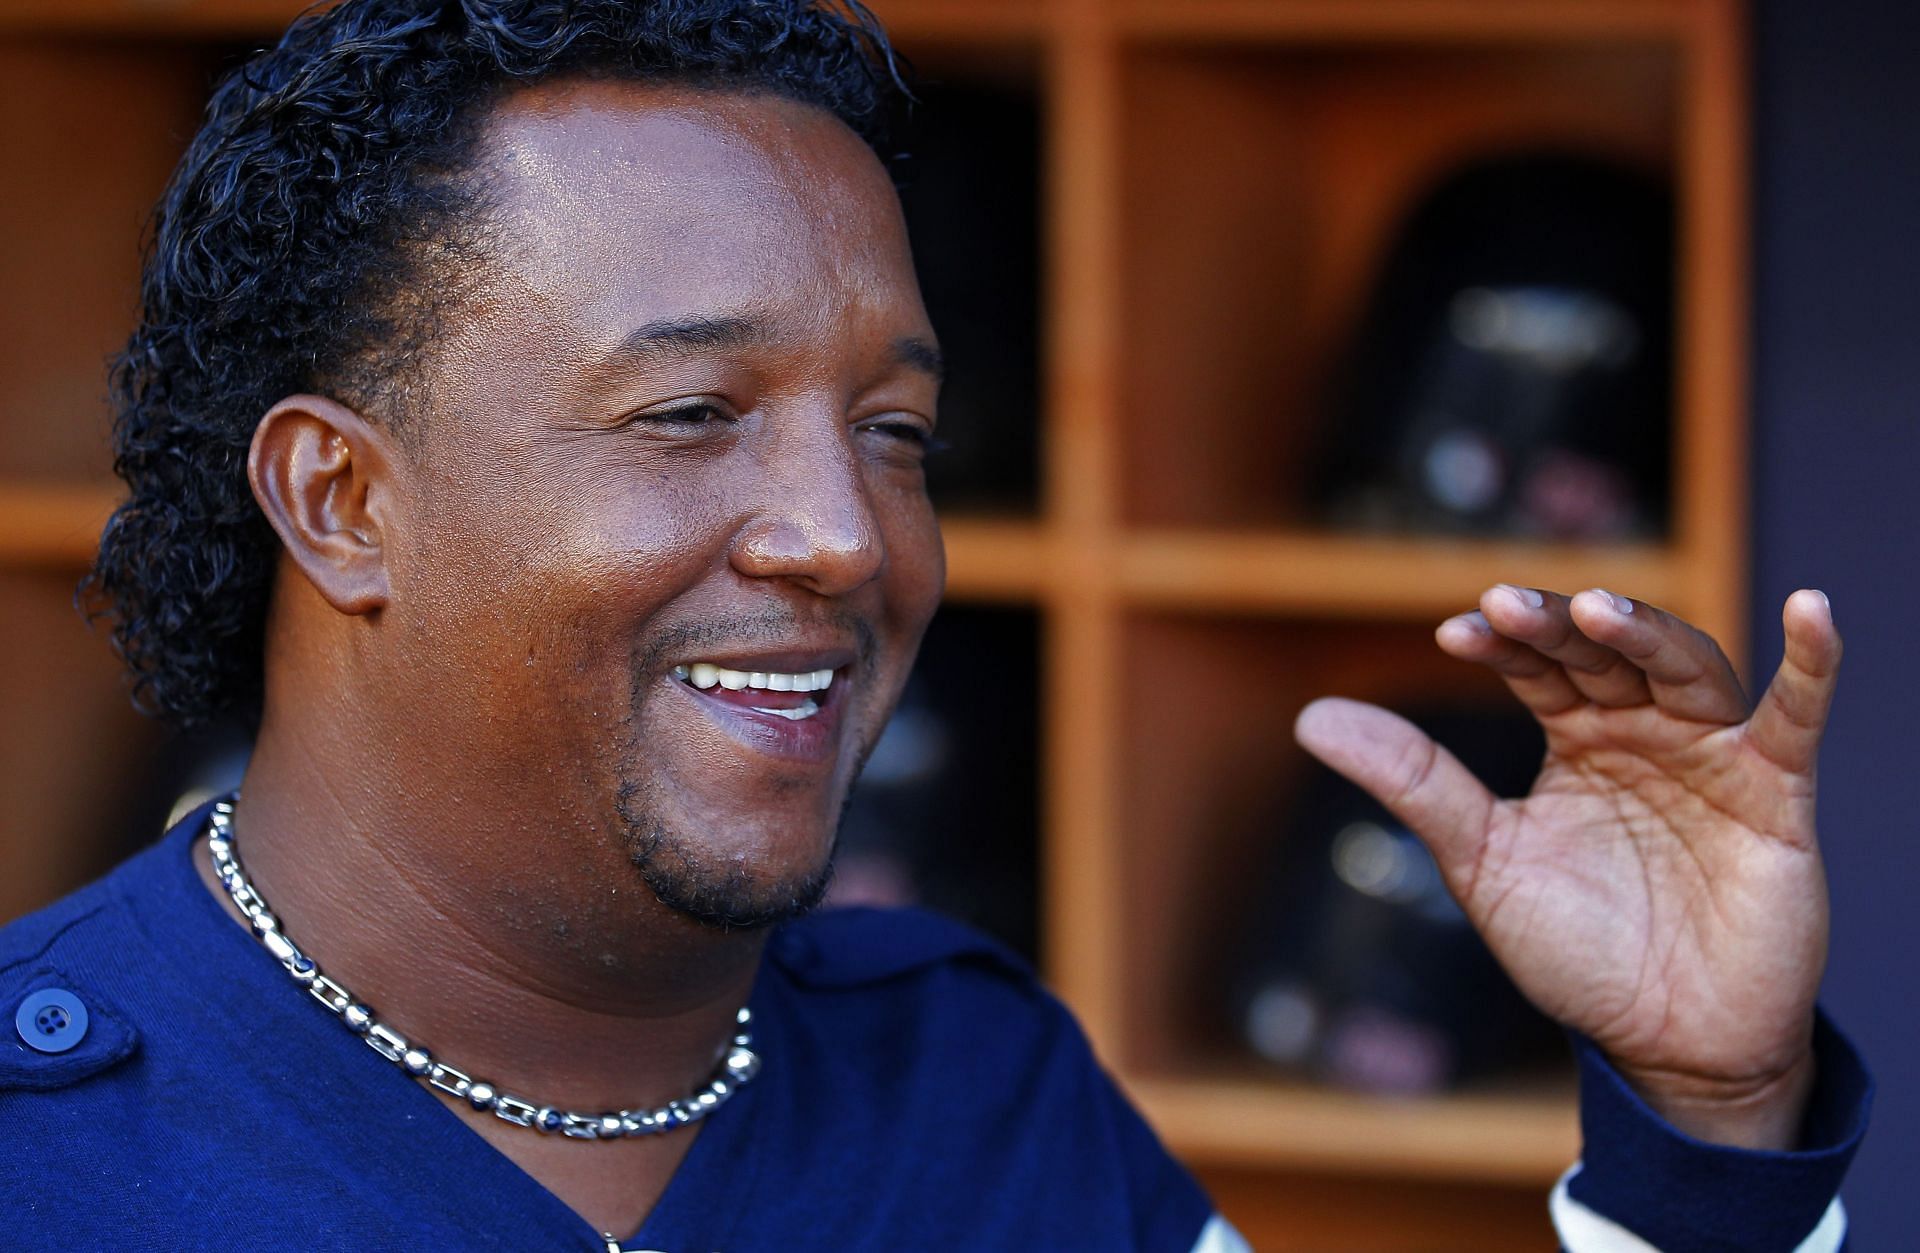 Pedro Martinez tells MLB analyst that the Boston Red Sox could do